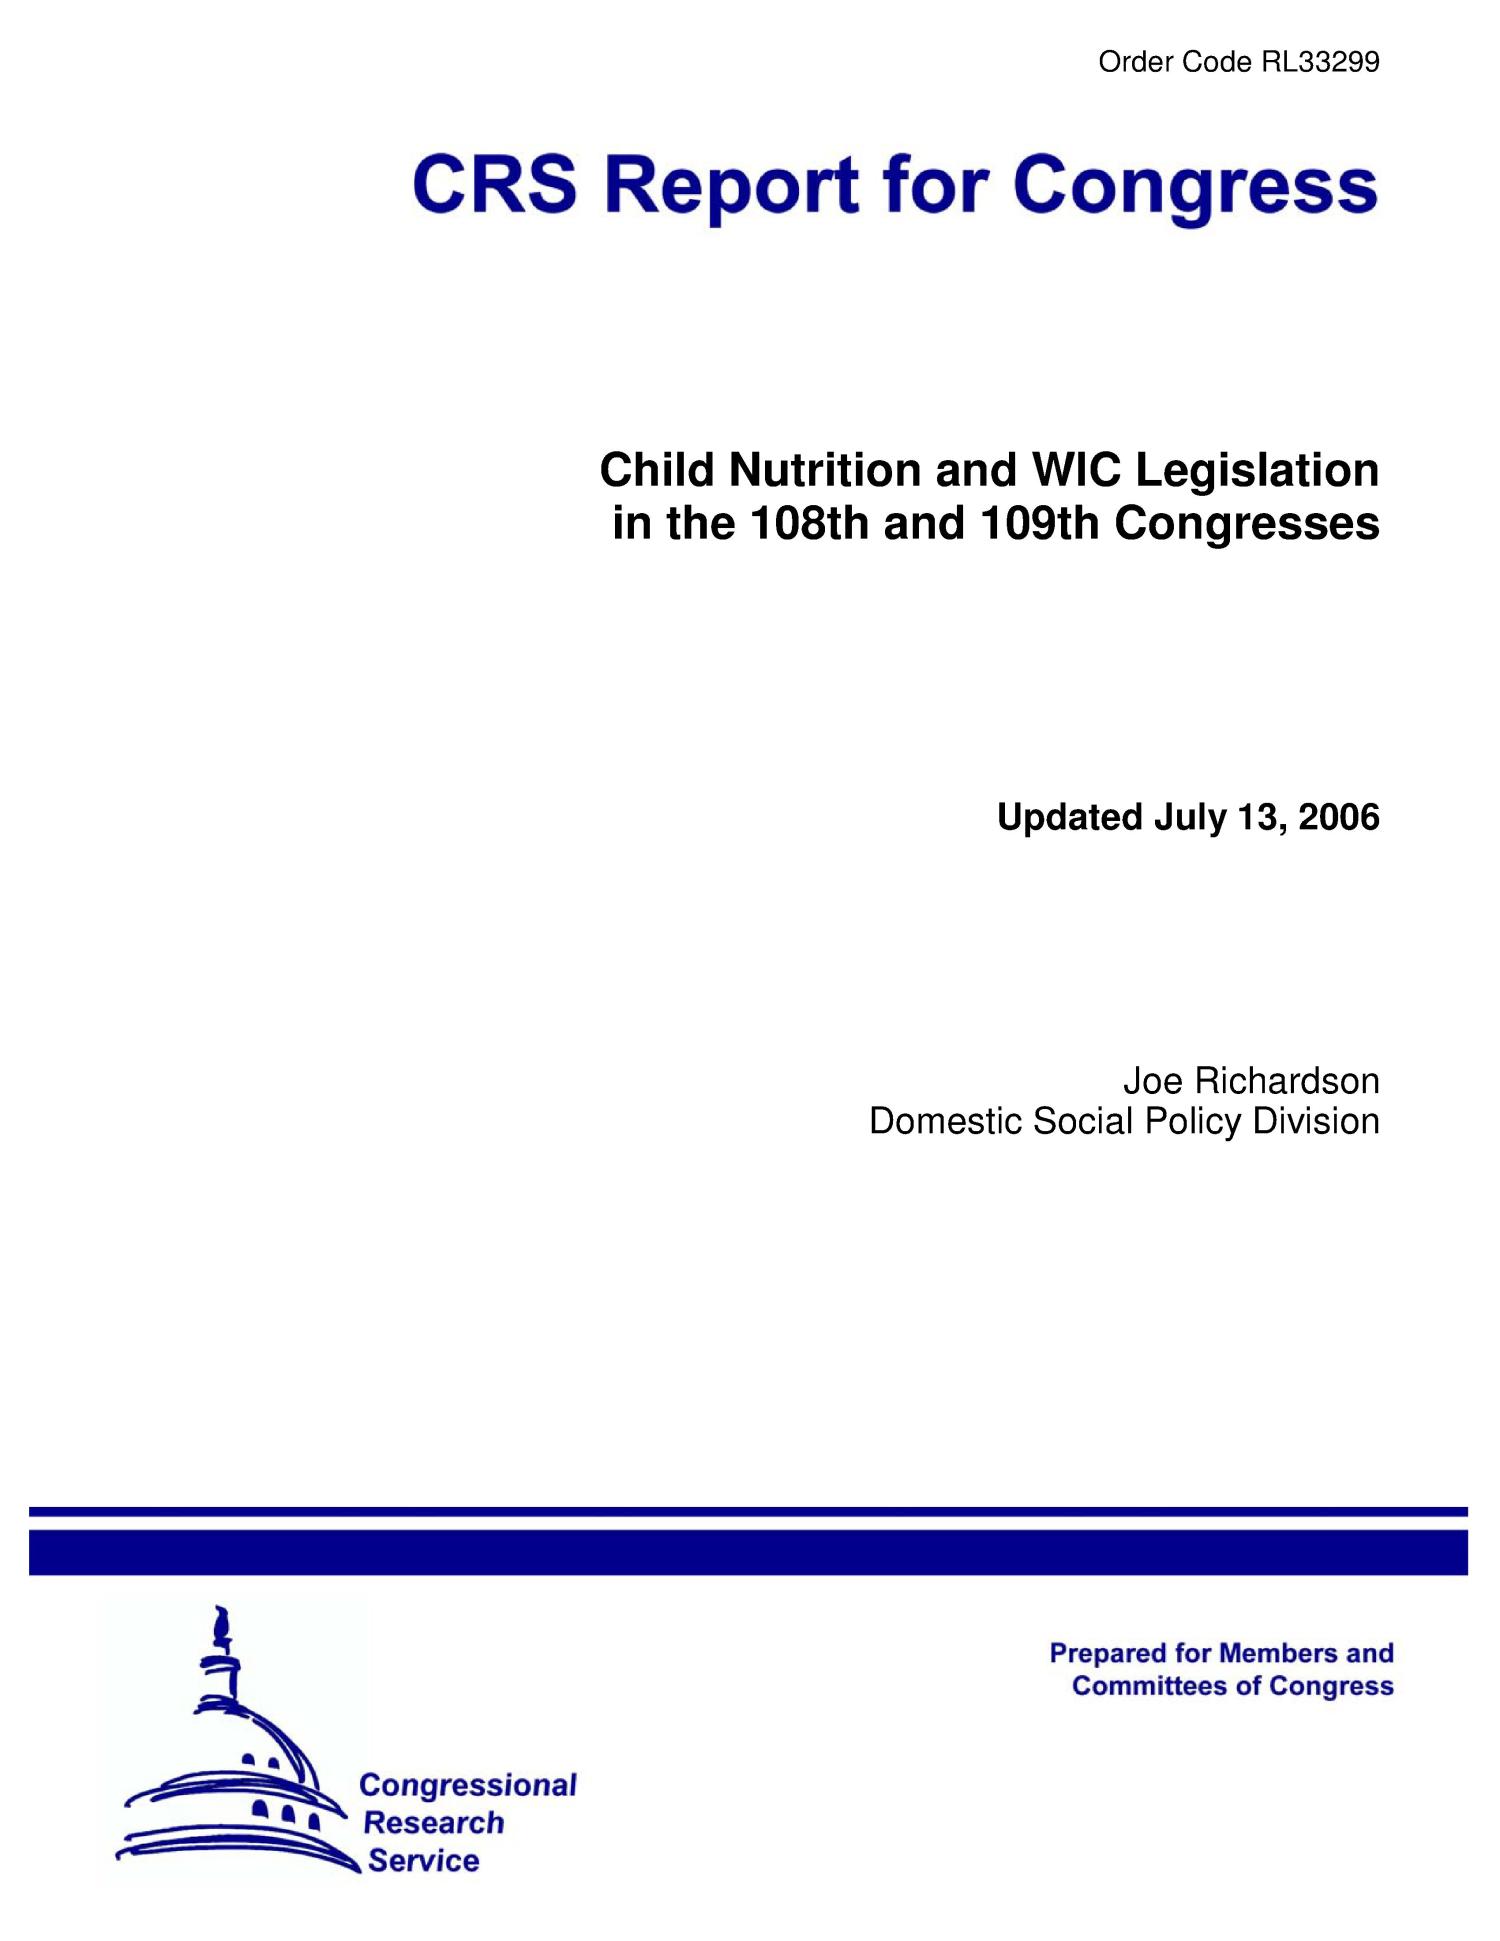 Child Nutrition and WIC Legislation in the 108th and 109th Congresses
                                                
                                                    [Sequence #]: 1 of 22
                                                